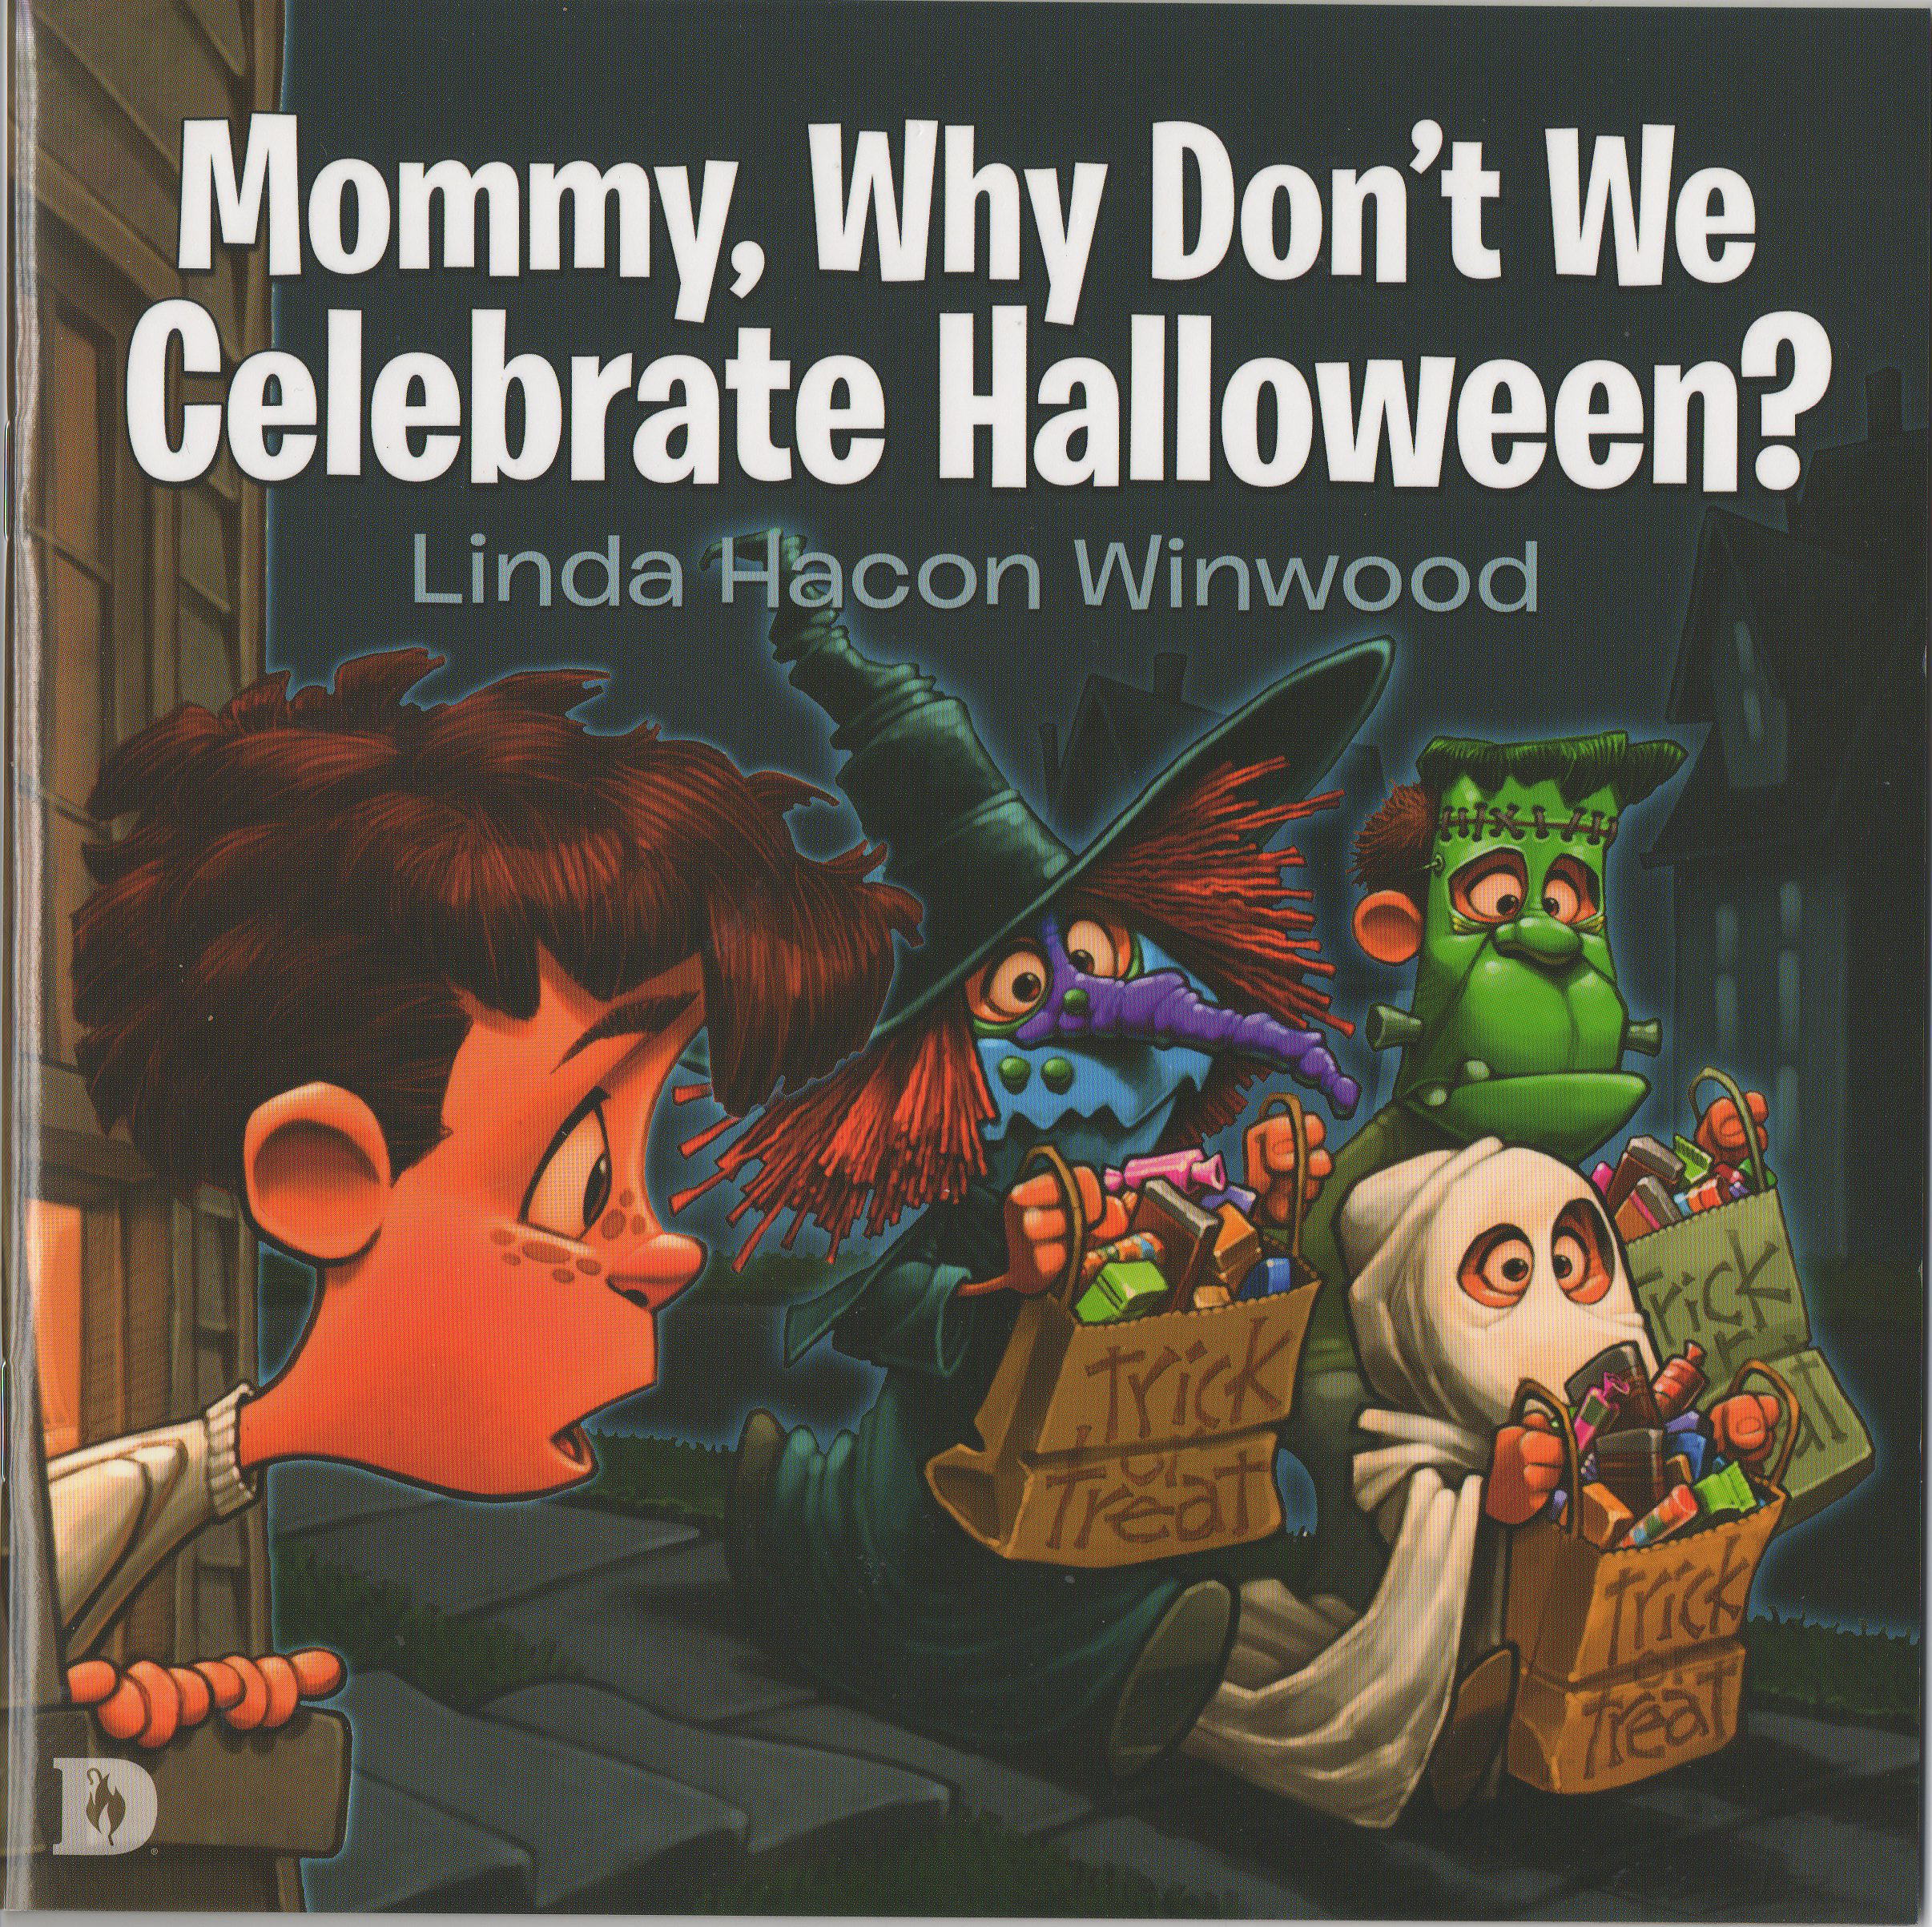 Mommy, Why Don't We Celebrate Halloween? - Children's story book